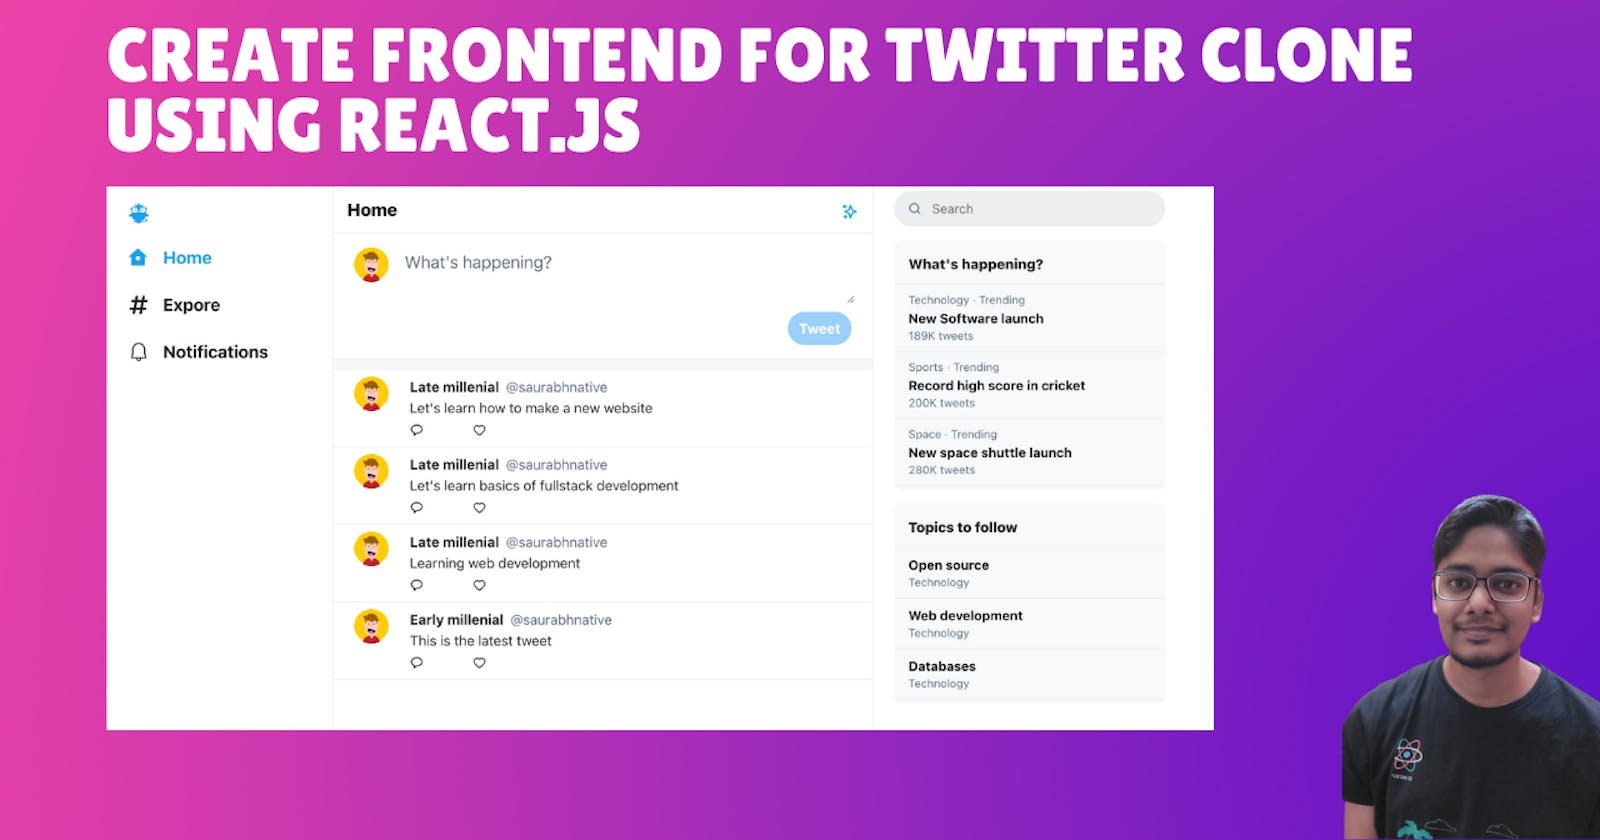 Create frontend for Twitter clone using React.js